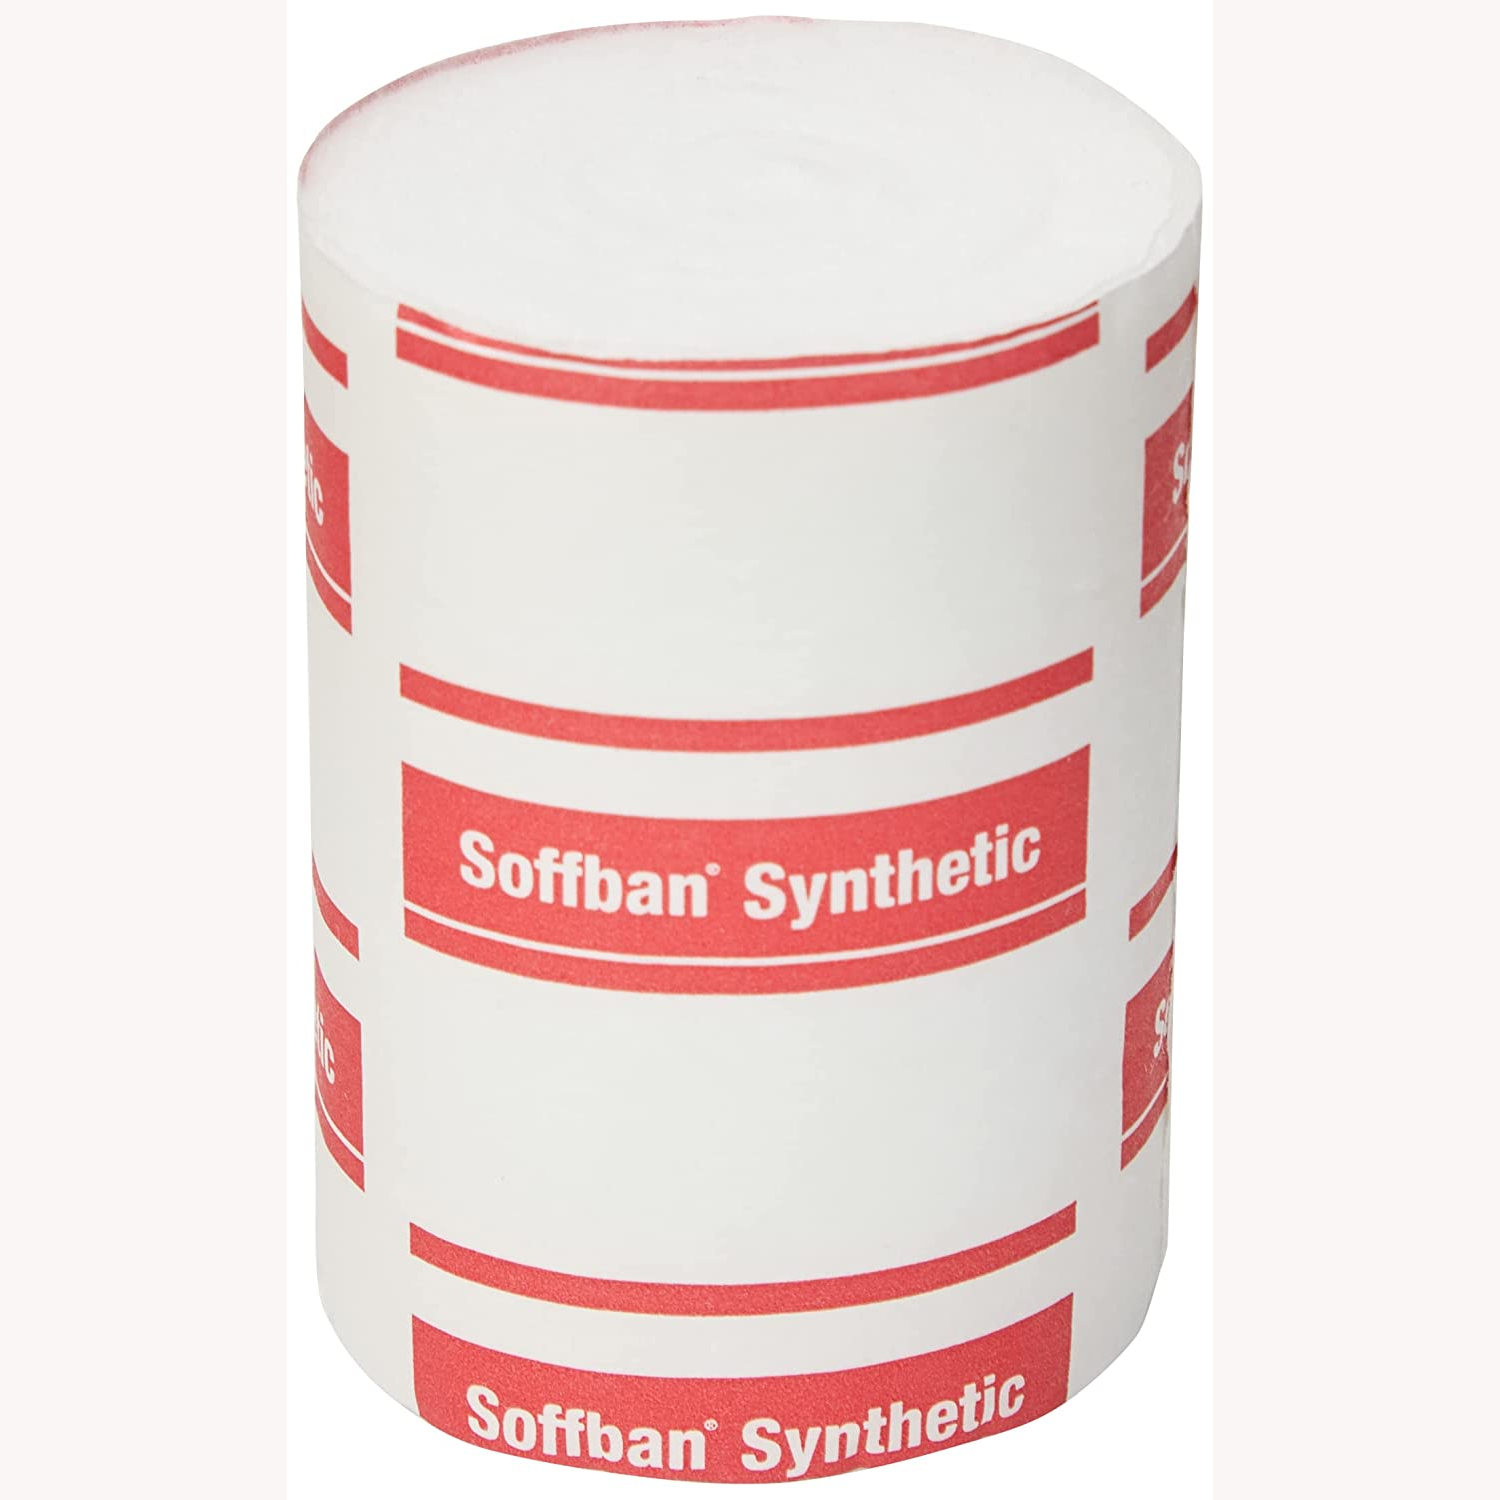 Soffban Synthetic Padding | 10cm x 2.7m | Pack of 12 (1)